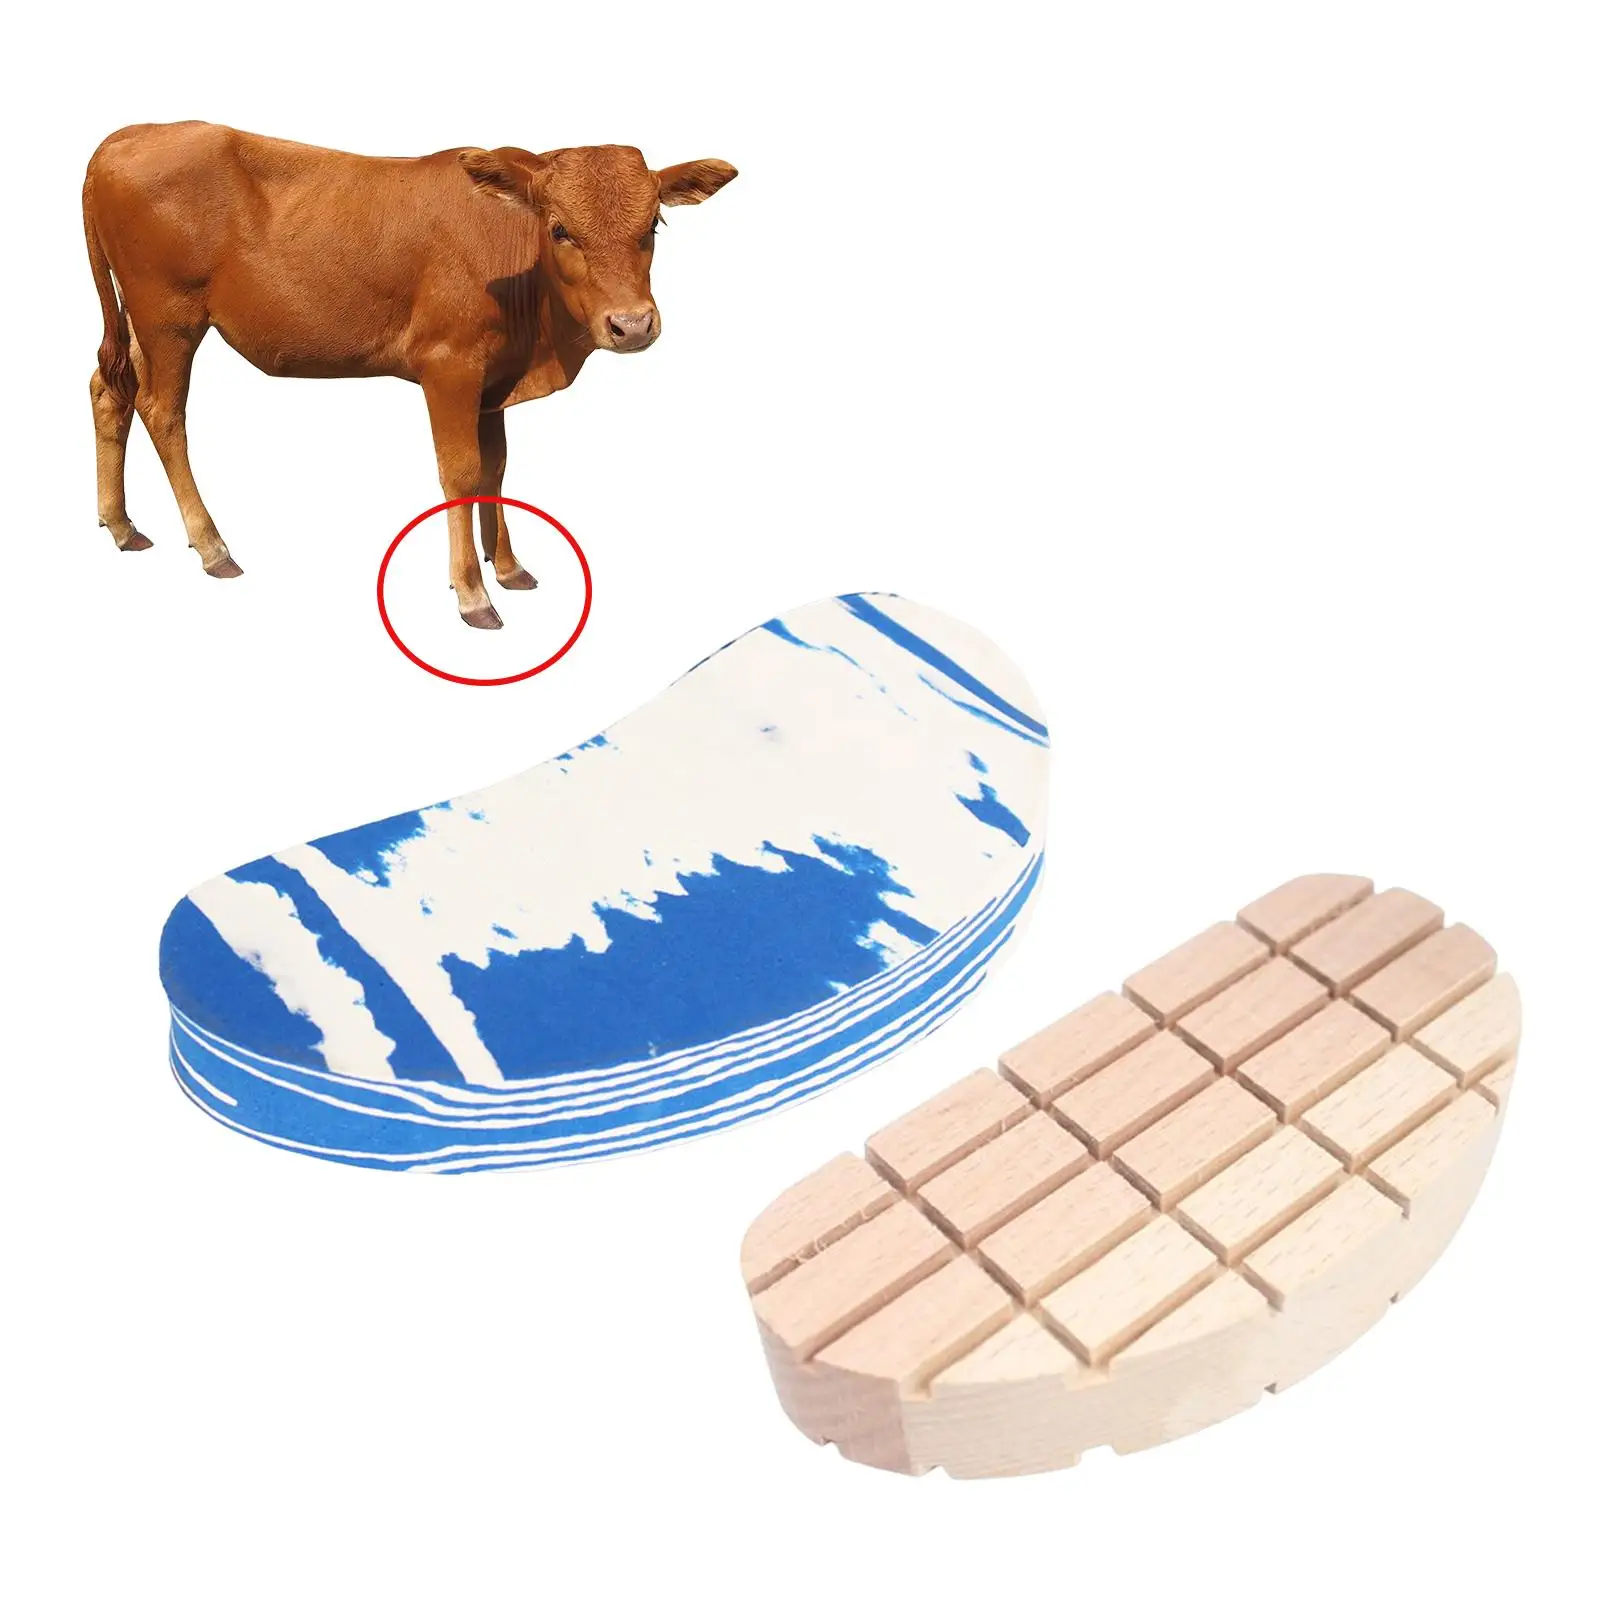 Cow Hoof Pad Slabs Repair Tool Professional Rubber Farms Cow Trimming Cushion for Cow